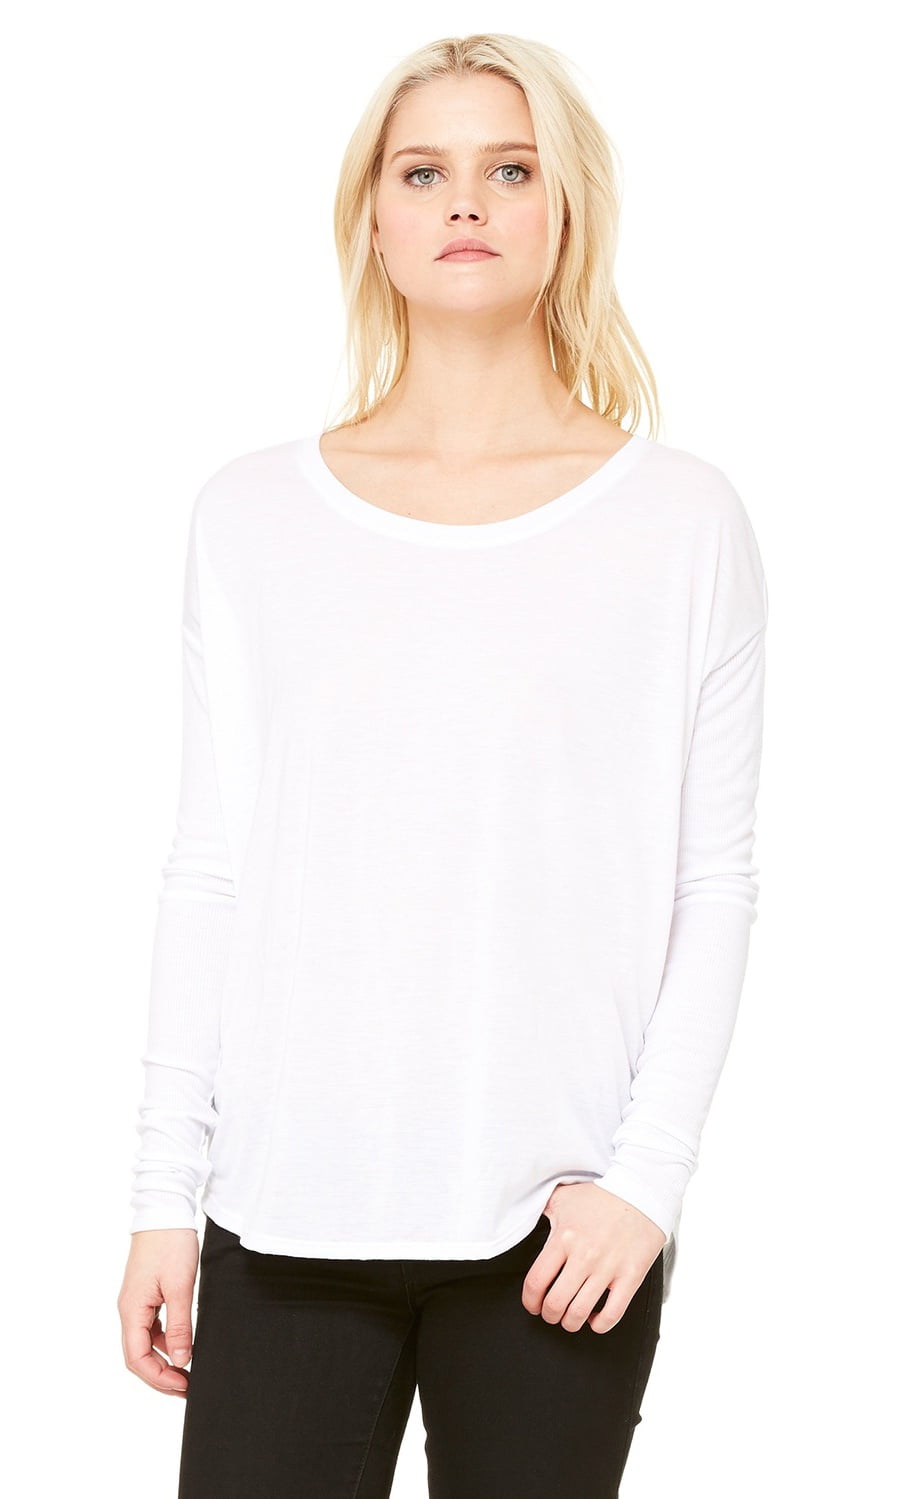 BELLA+CANVAS - The Bella + Canvas Ladies Flowy Long Sleeve T-Shirt with ...